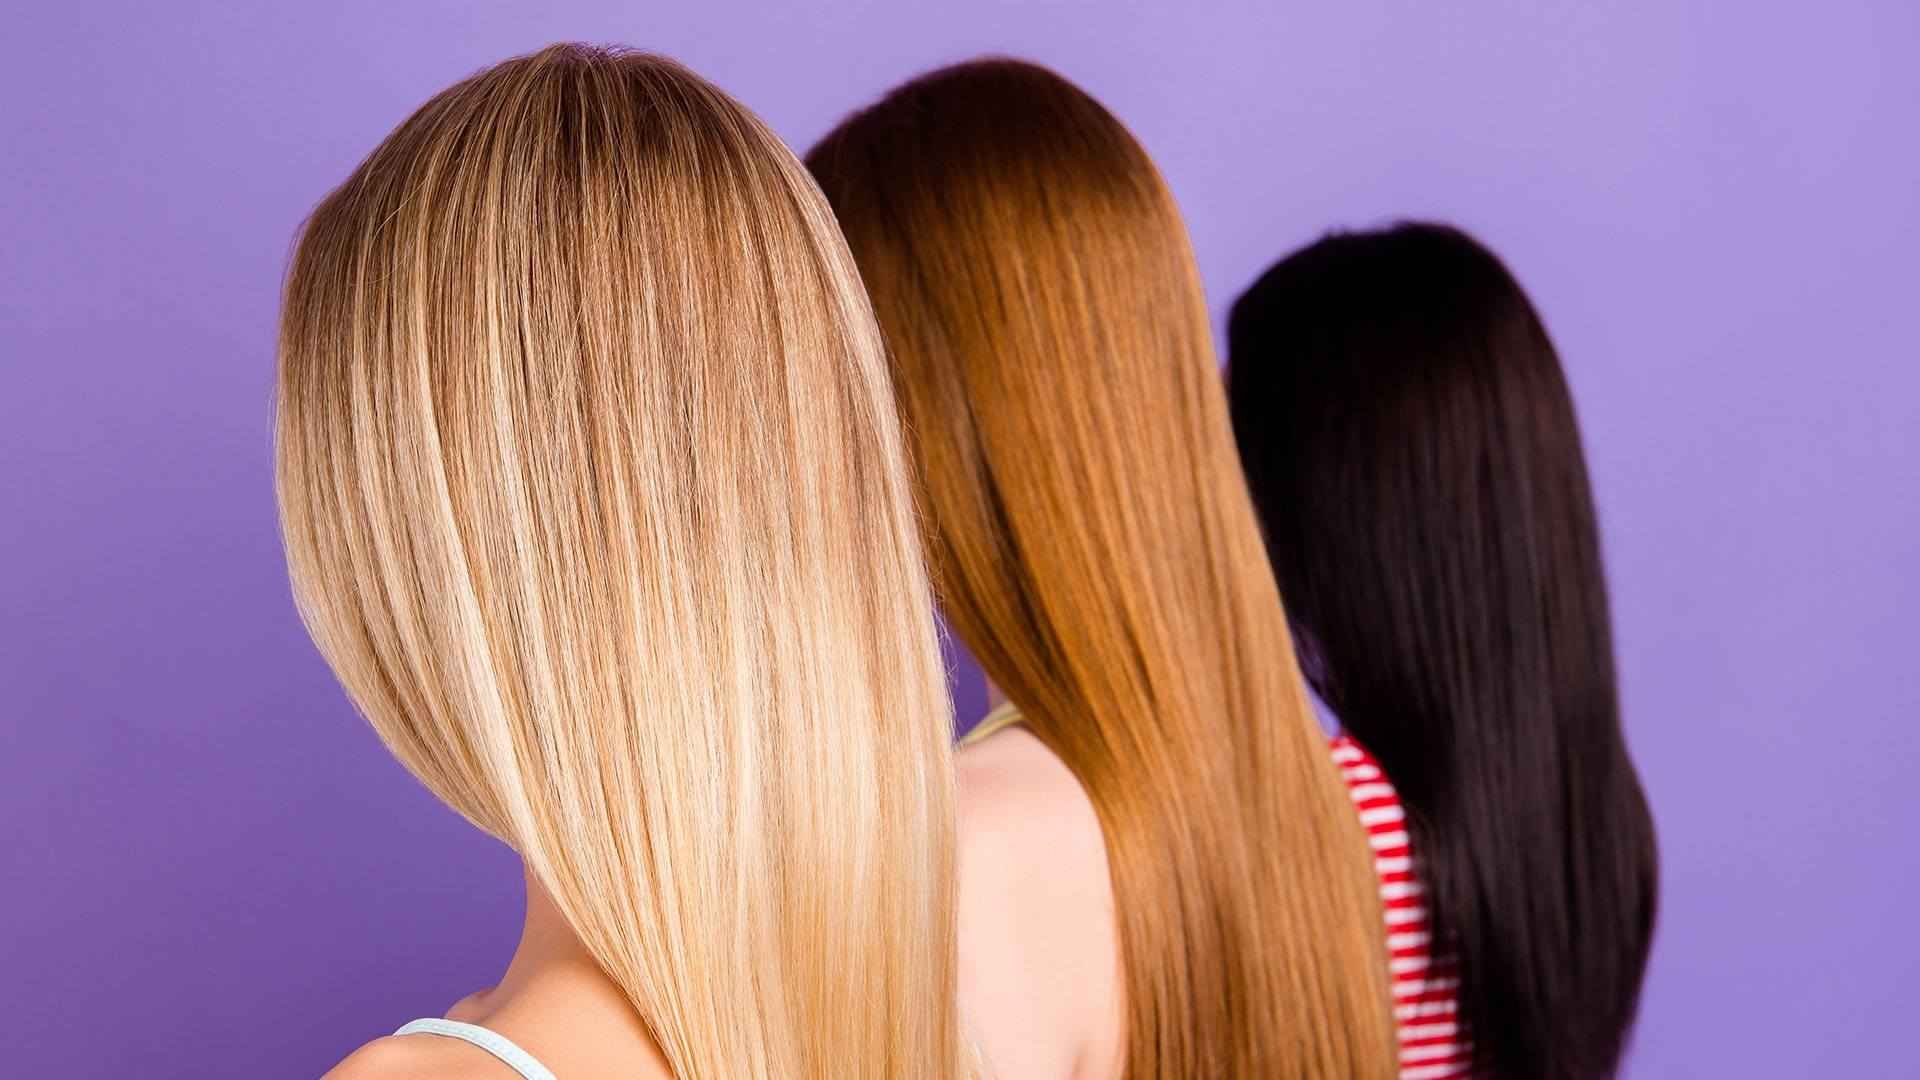 How to Find the Best Hair Color for Your Skin Tone